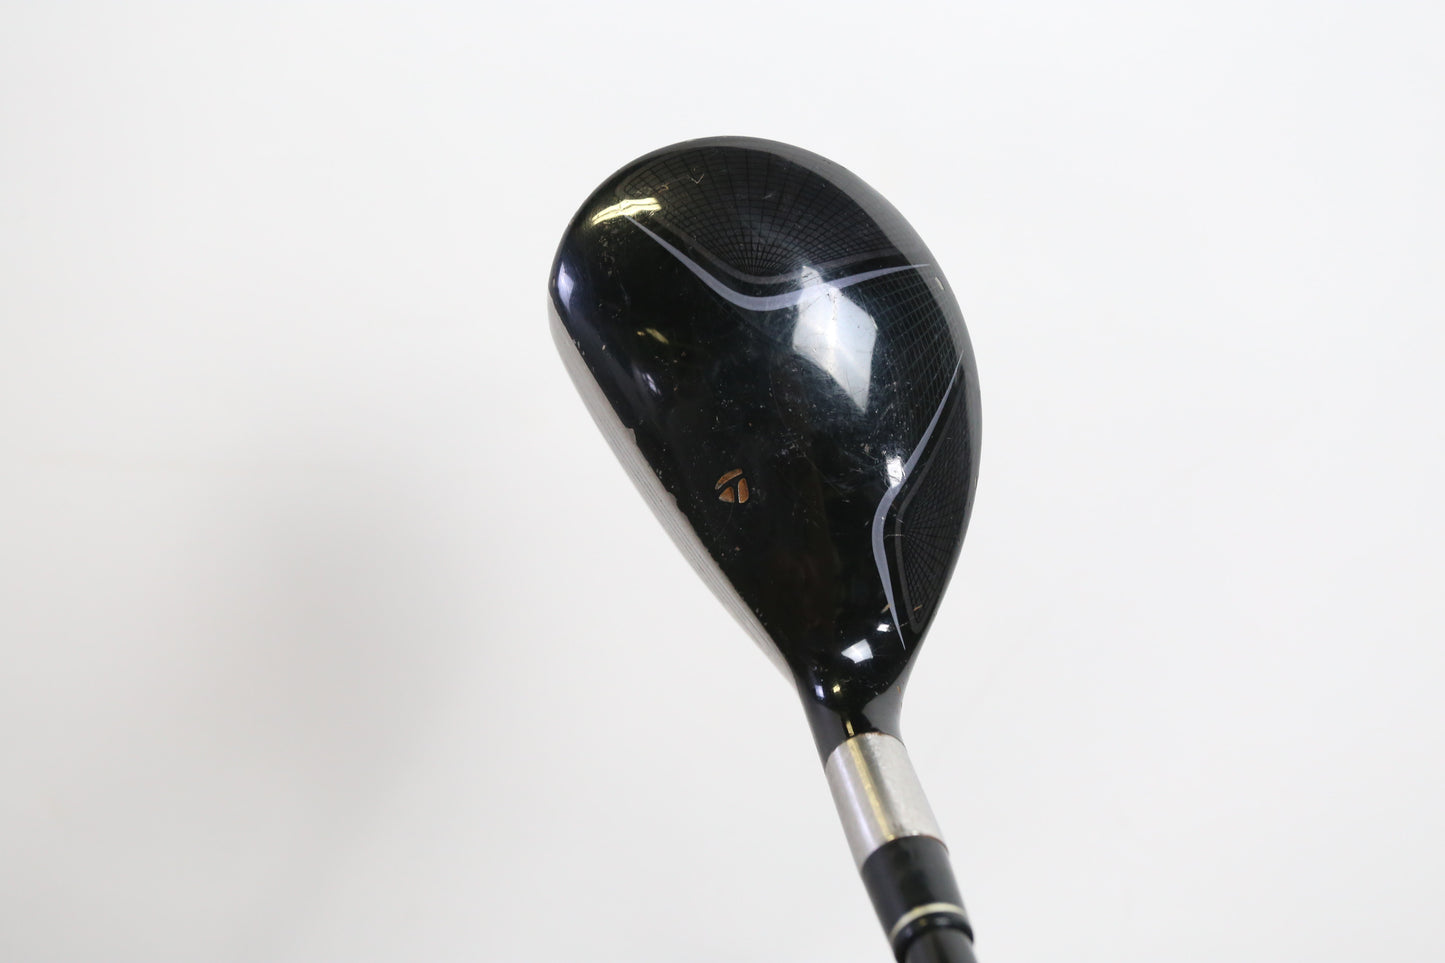 Used TaylorMade Rescue 2009 3H Hybrid - Right-Handed - 19 Degrees - Stiff Flex